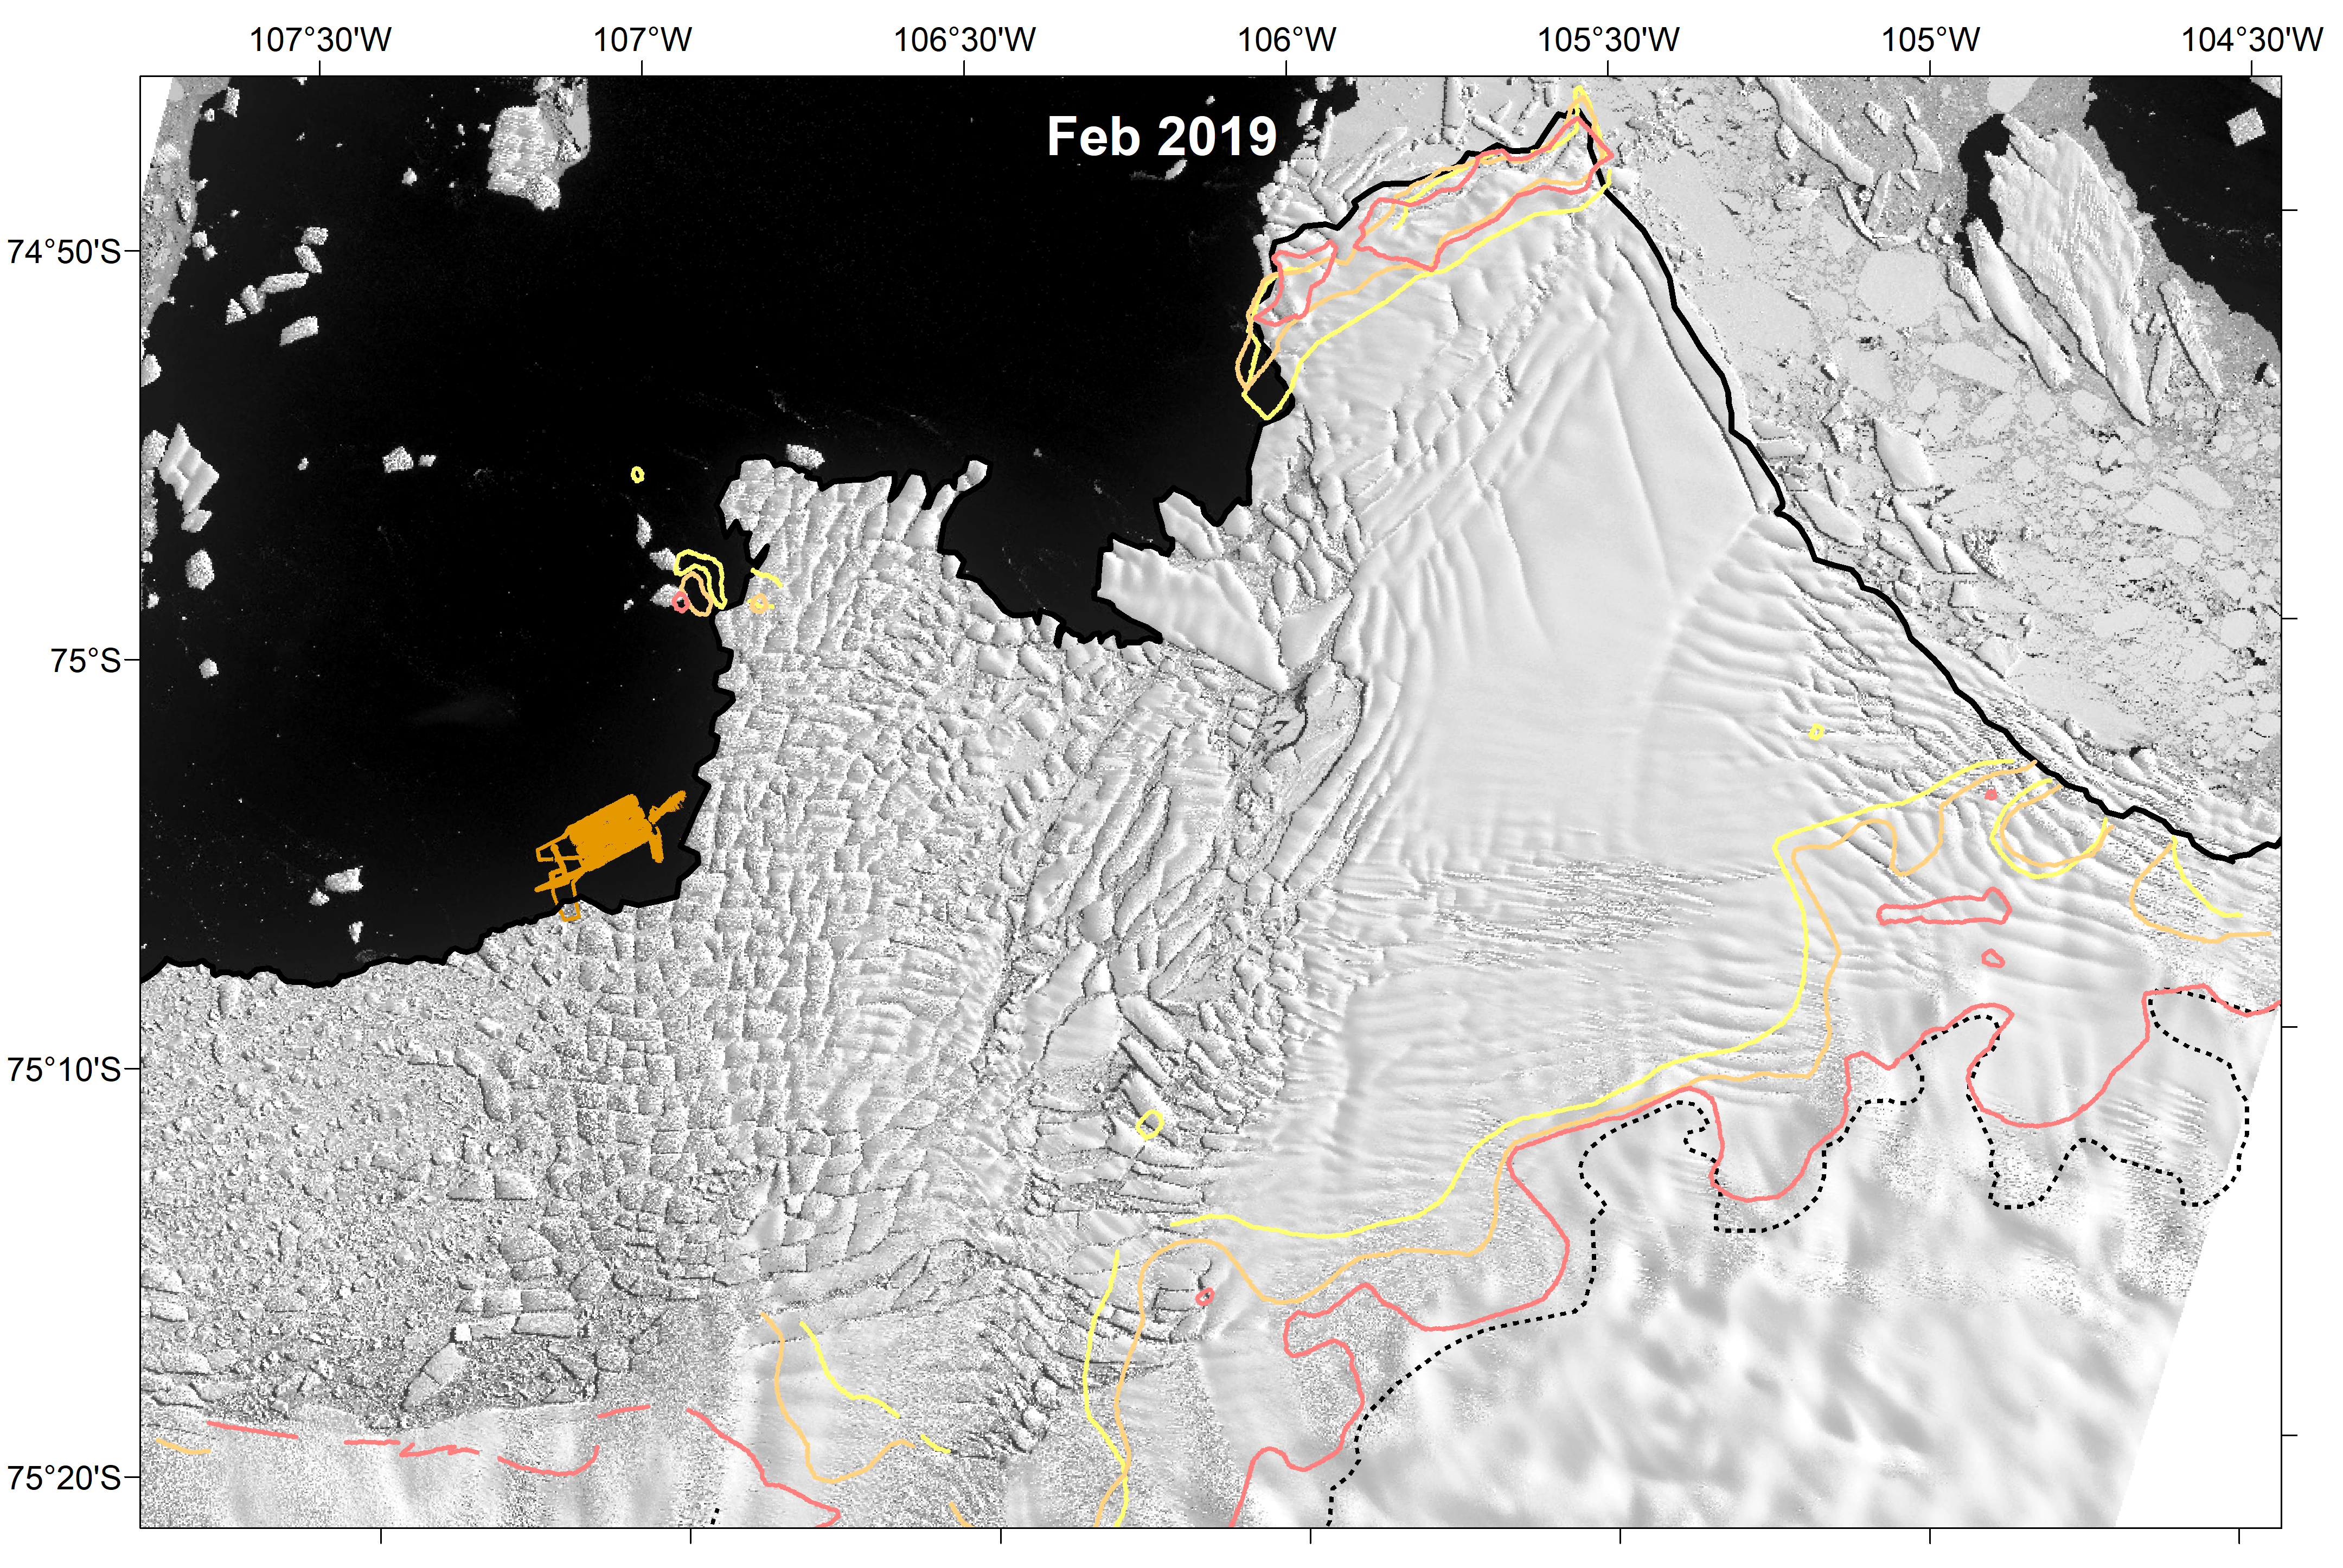 Map of Thwaites Glacier shown in Landsat 8 satellite imagery collected in February 2019. The track of the mission of the autonomous underwater vehicle is shown in orange. Changes in grounding line positions of Thwaites Glacier in the recent past shown by colored lines. Graphic: Alastair Graham / University of South Florida